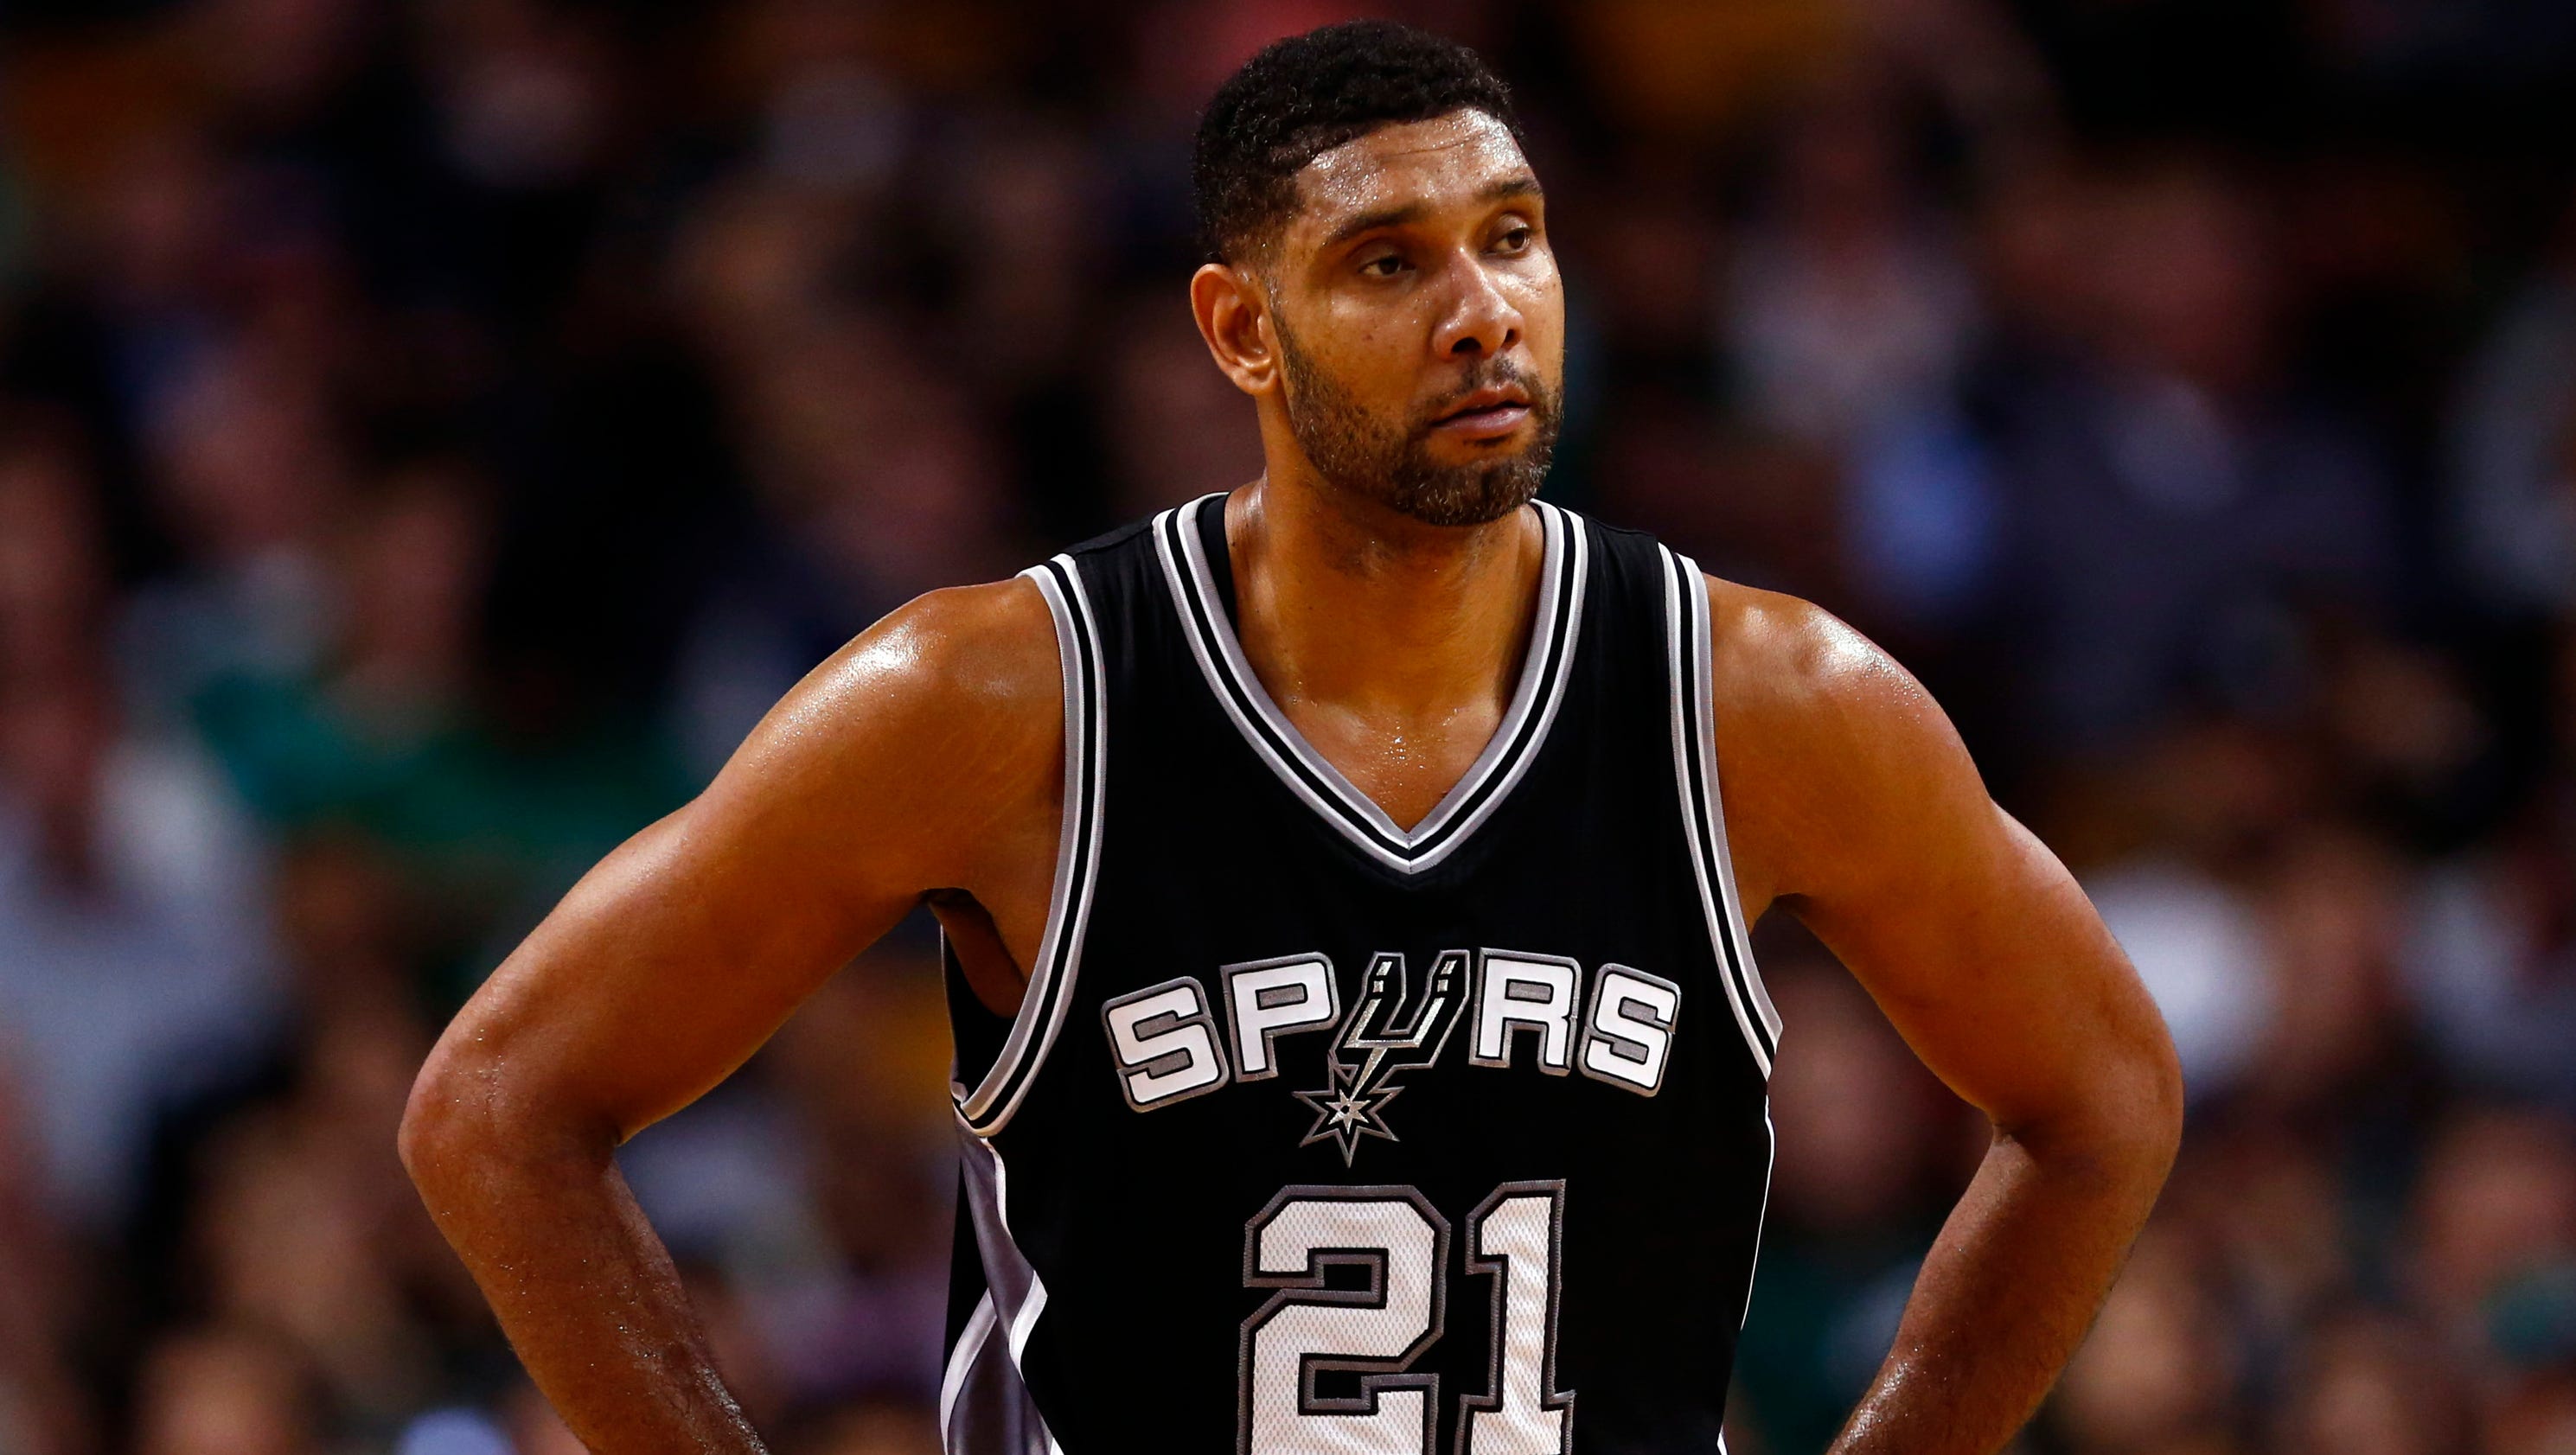 NBA world reacts to Tim Duncan's retirement